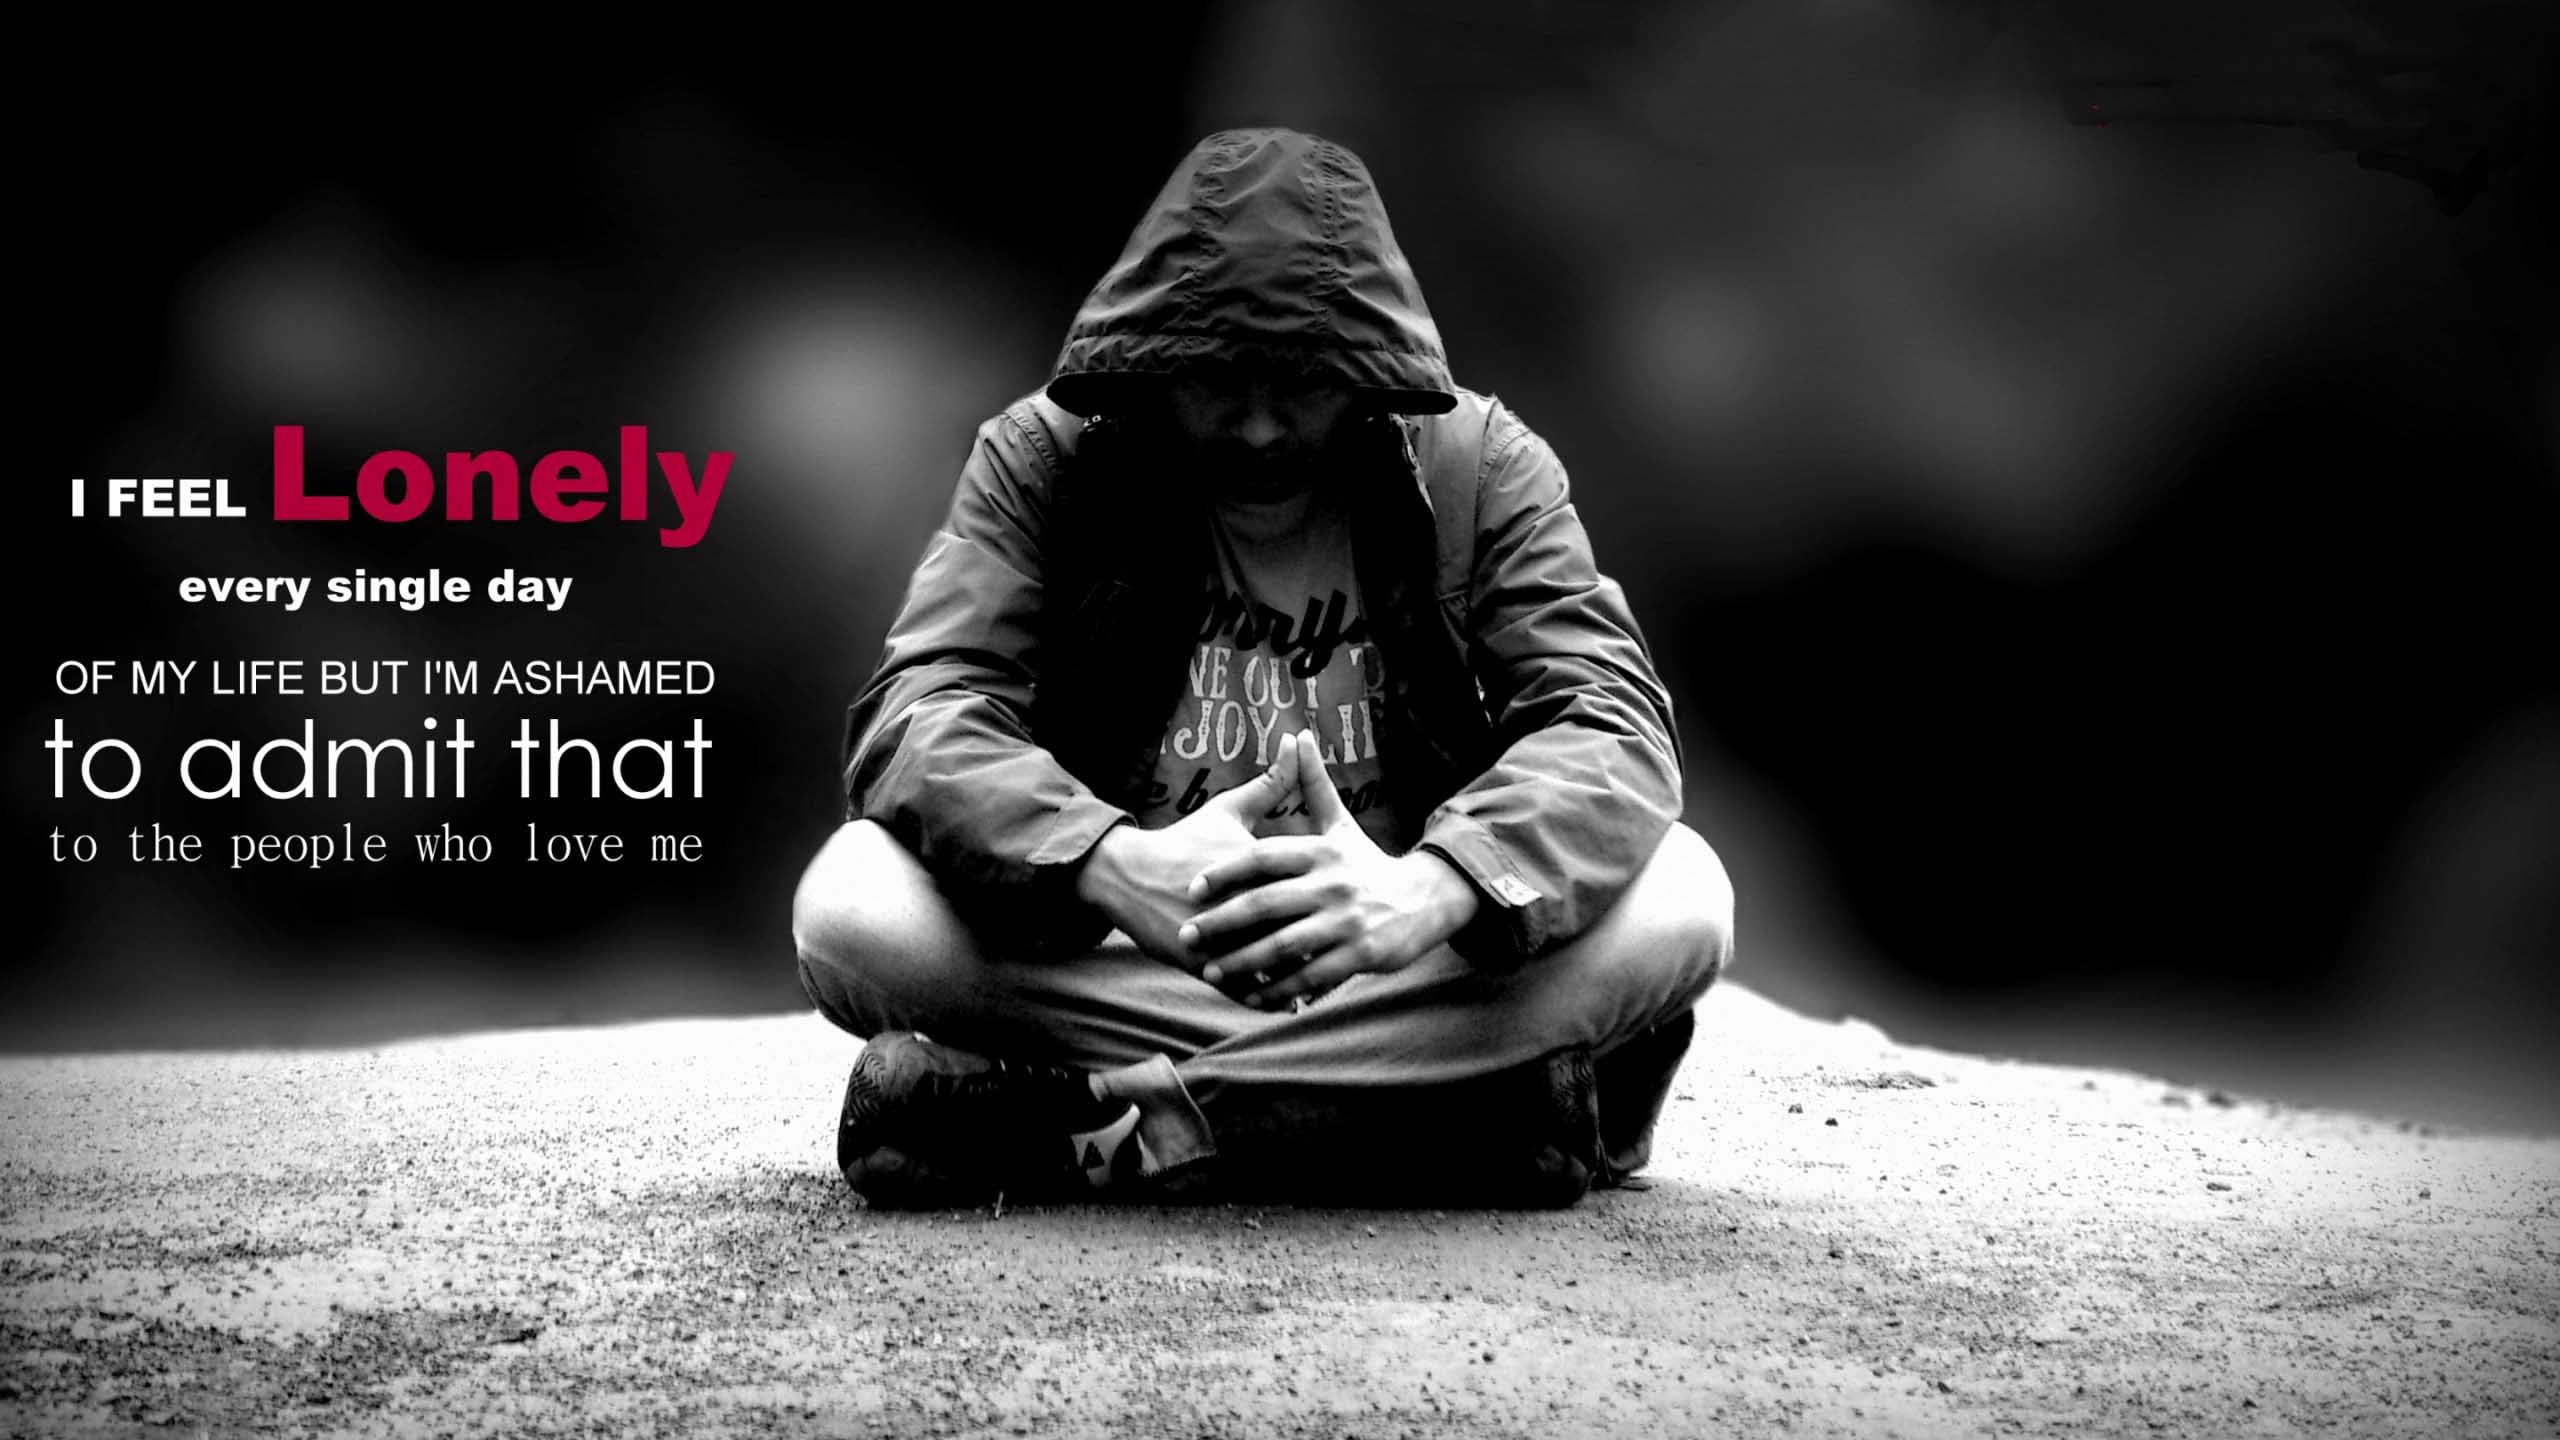 2560x1440 Free Download Sad Boy Wallpapers | Wallpapers, Backgrounds, Images .